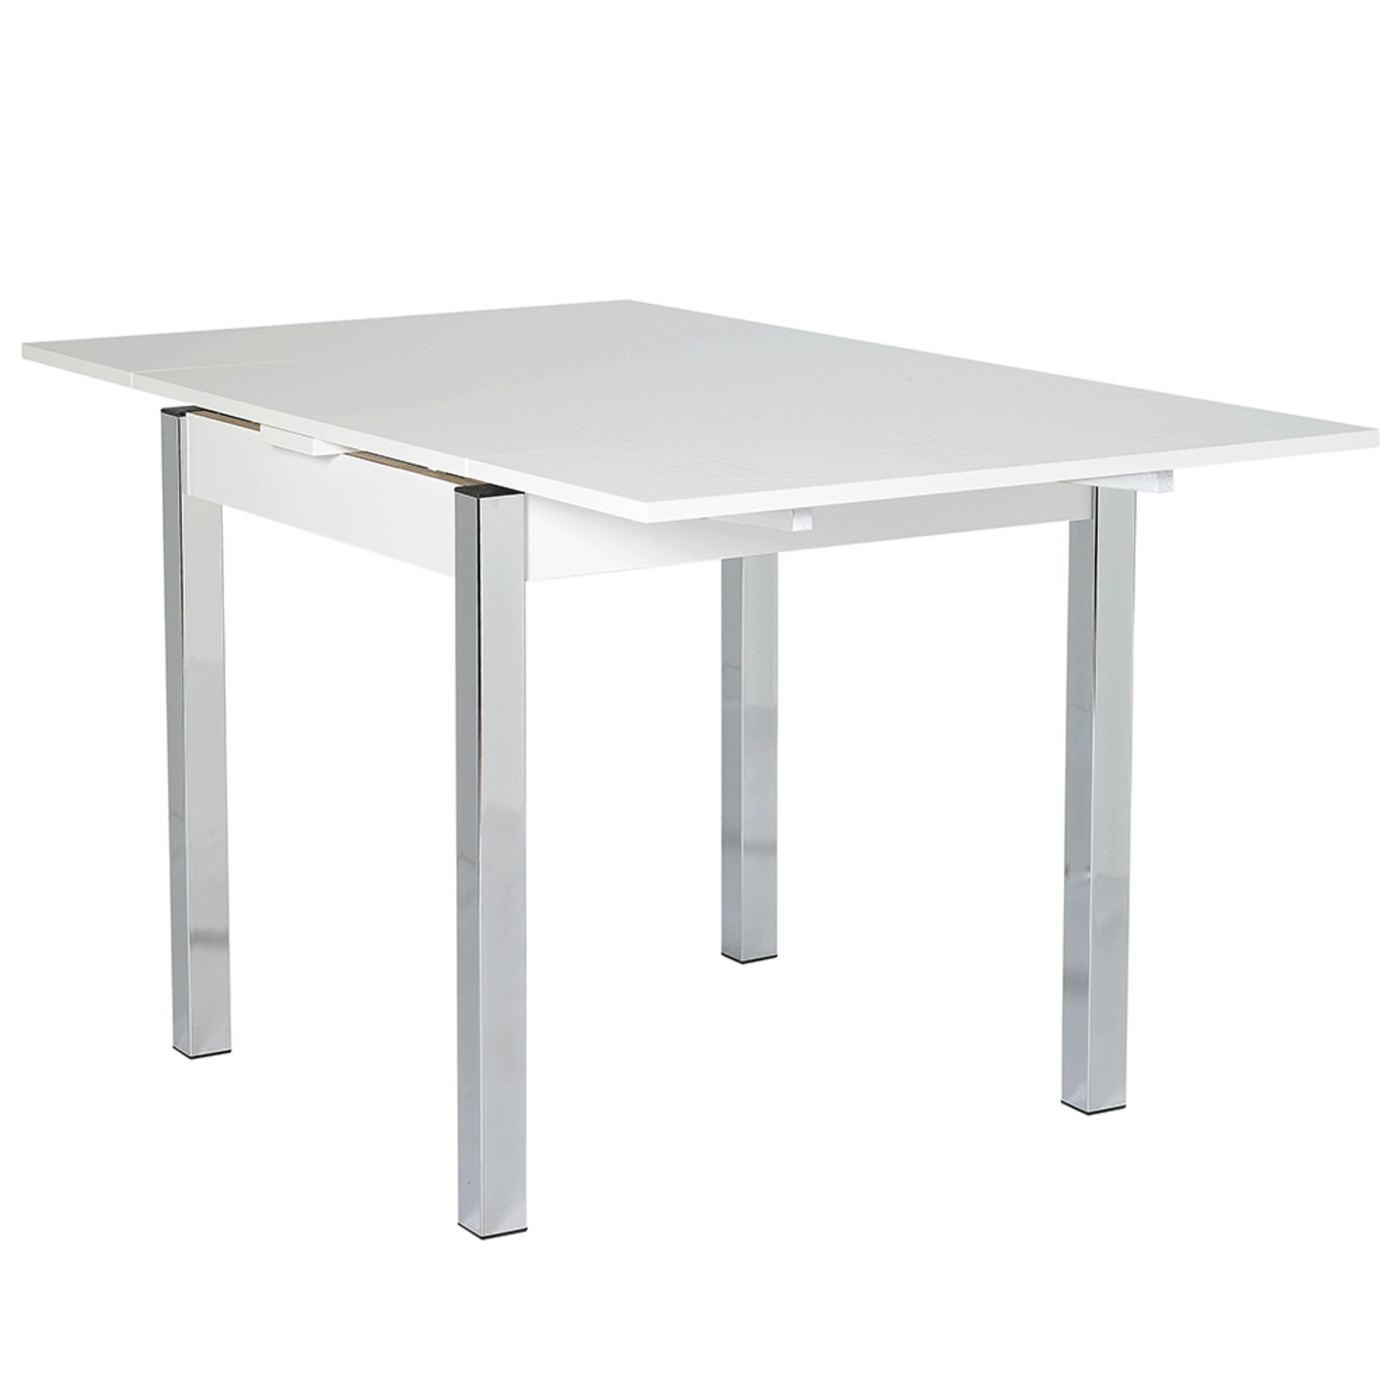 80cm Extending Dining Table Upholstered Bench And Chairs